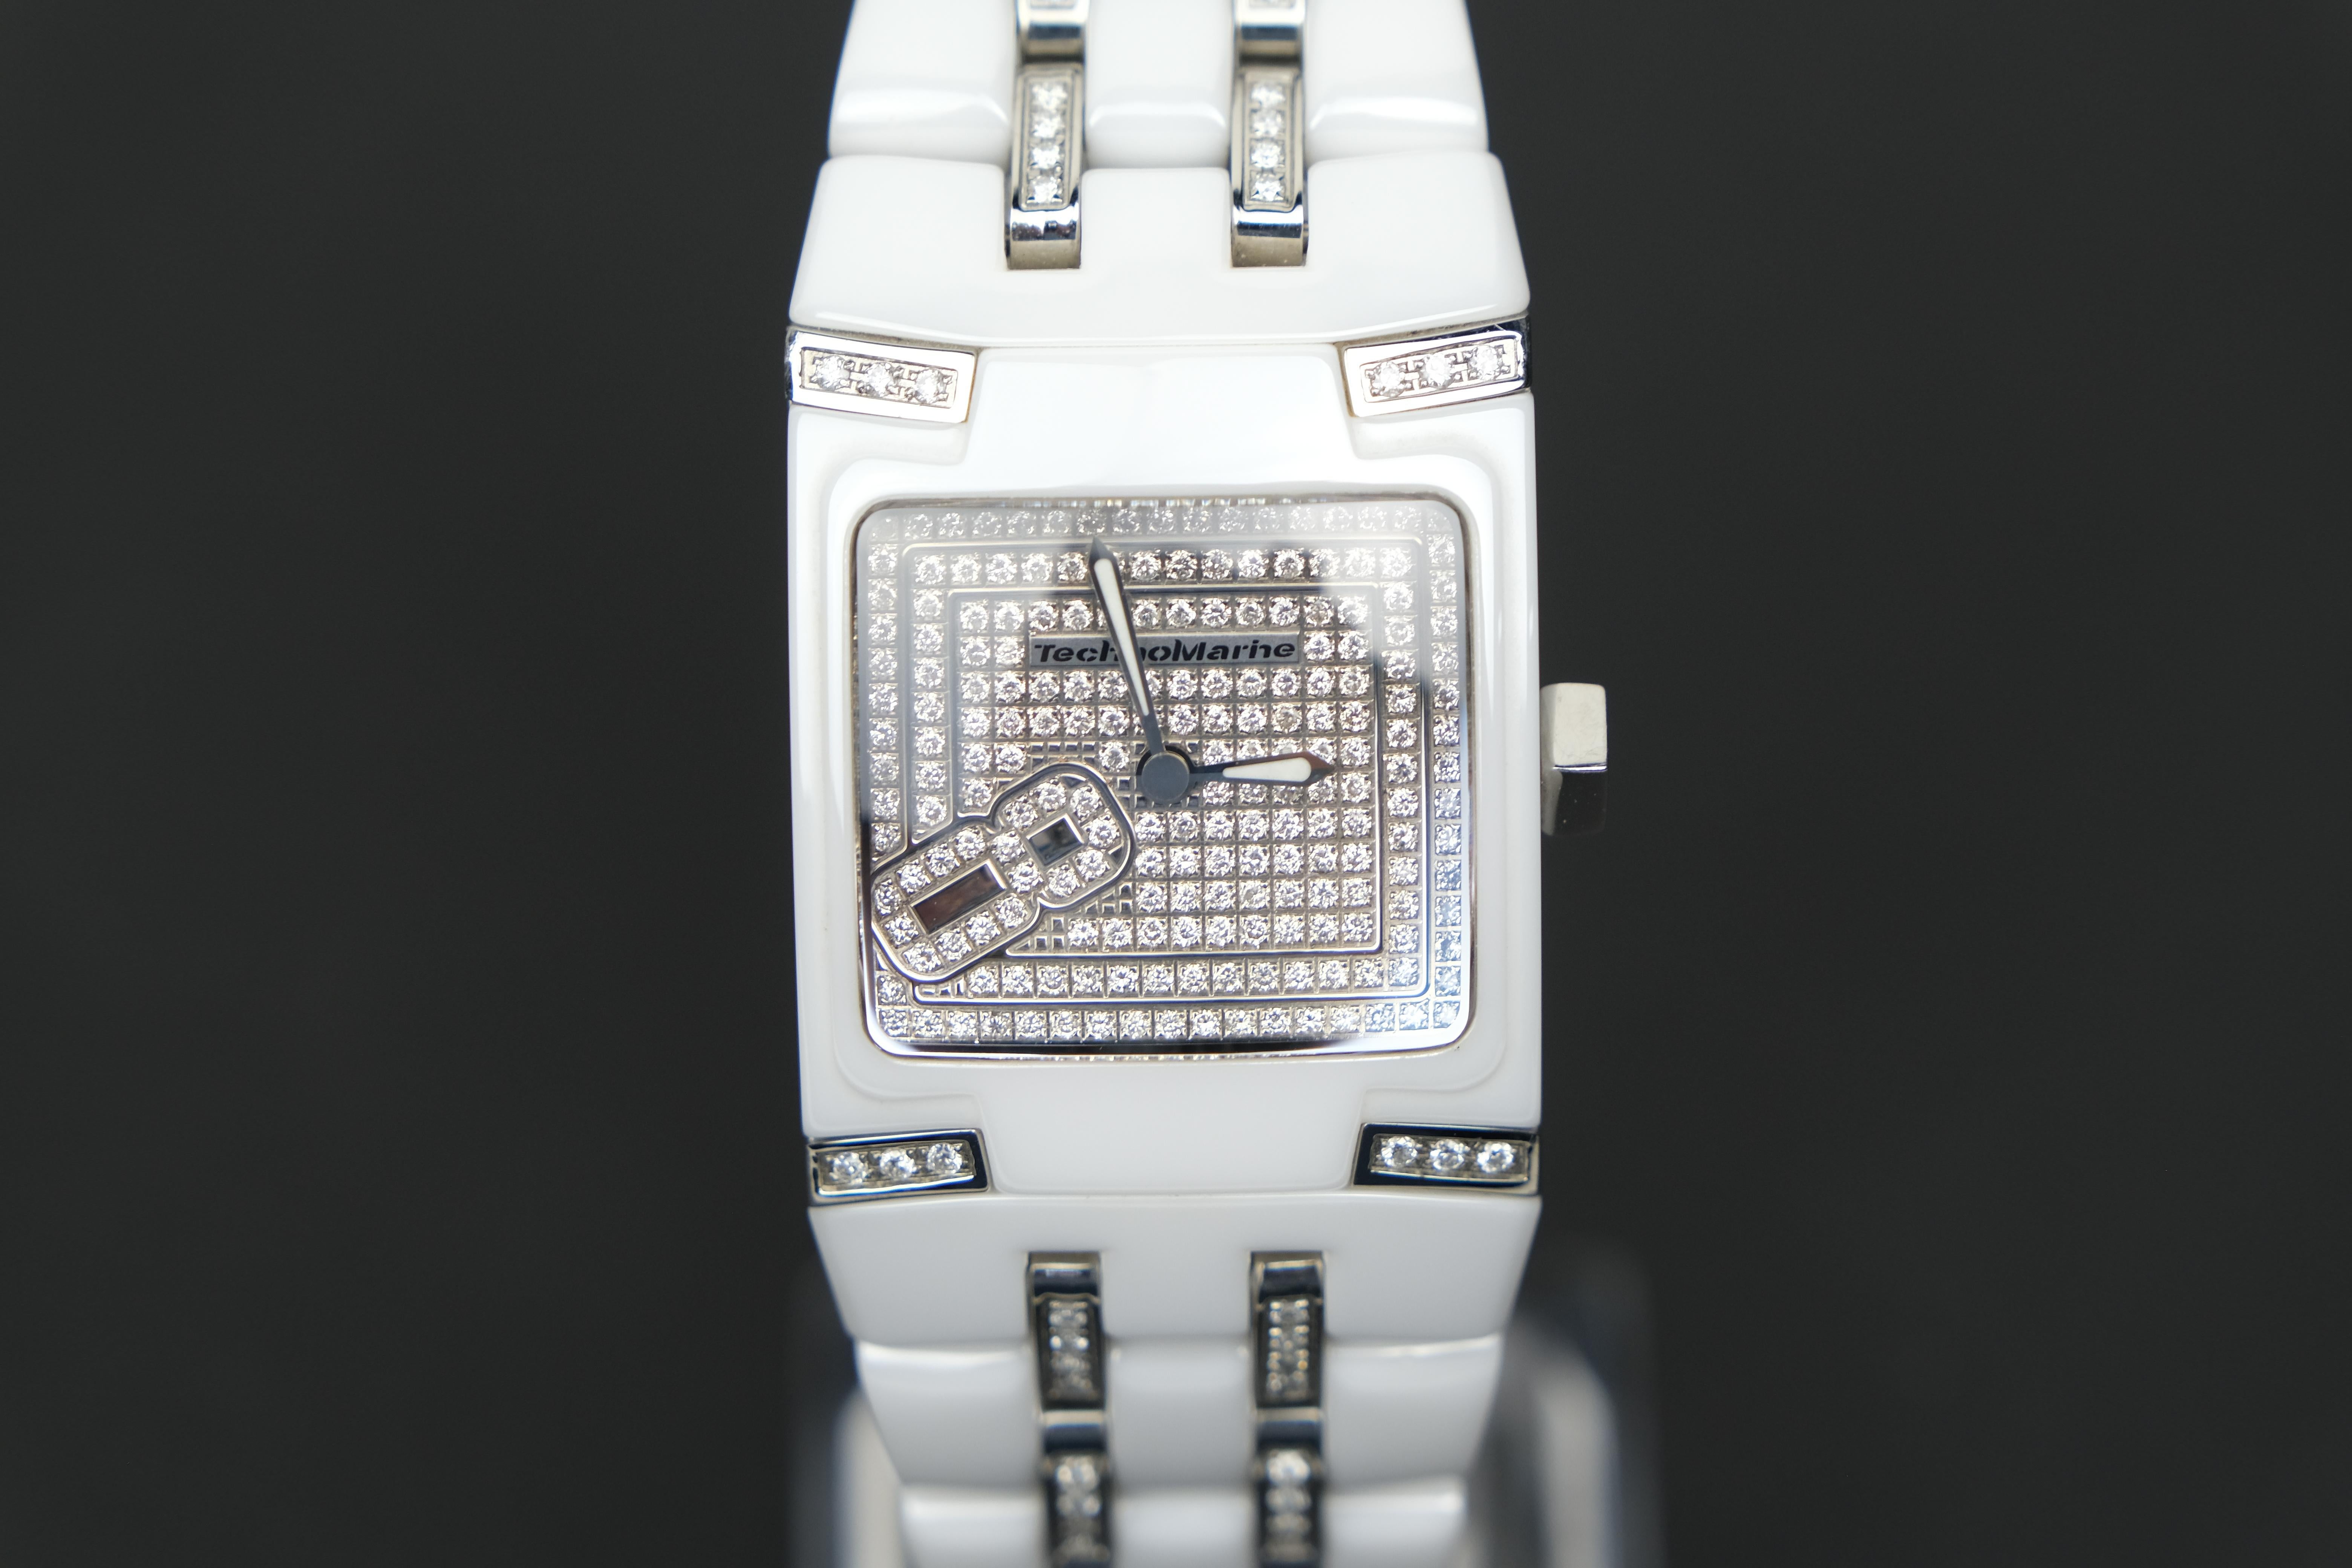 The watch is presented in a polished white ceramic with a stainless steel back and stainless steel accents. This extremely rare 'paved' version holds 263 separate round brilliant cut diamonds fully covering the face. A great rectangular design. This